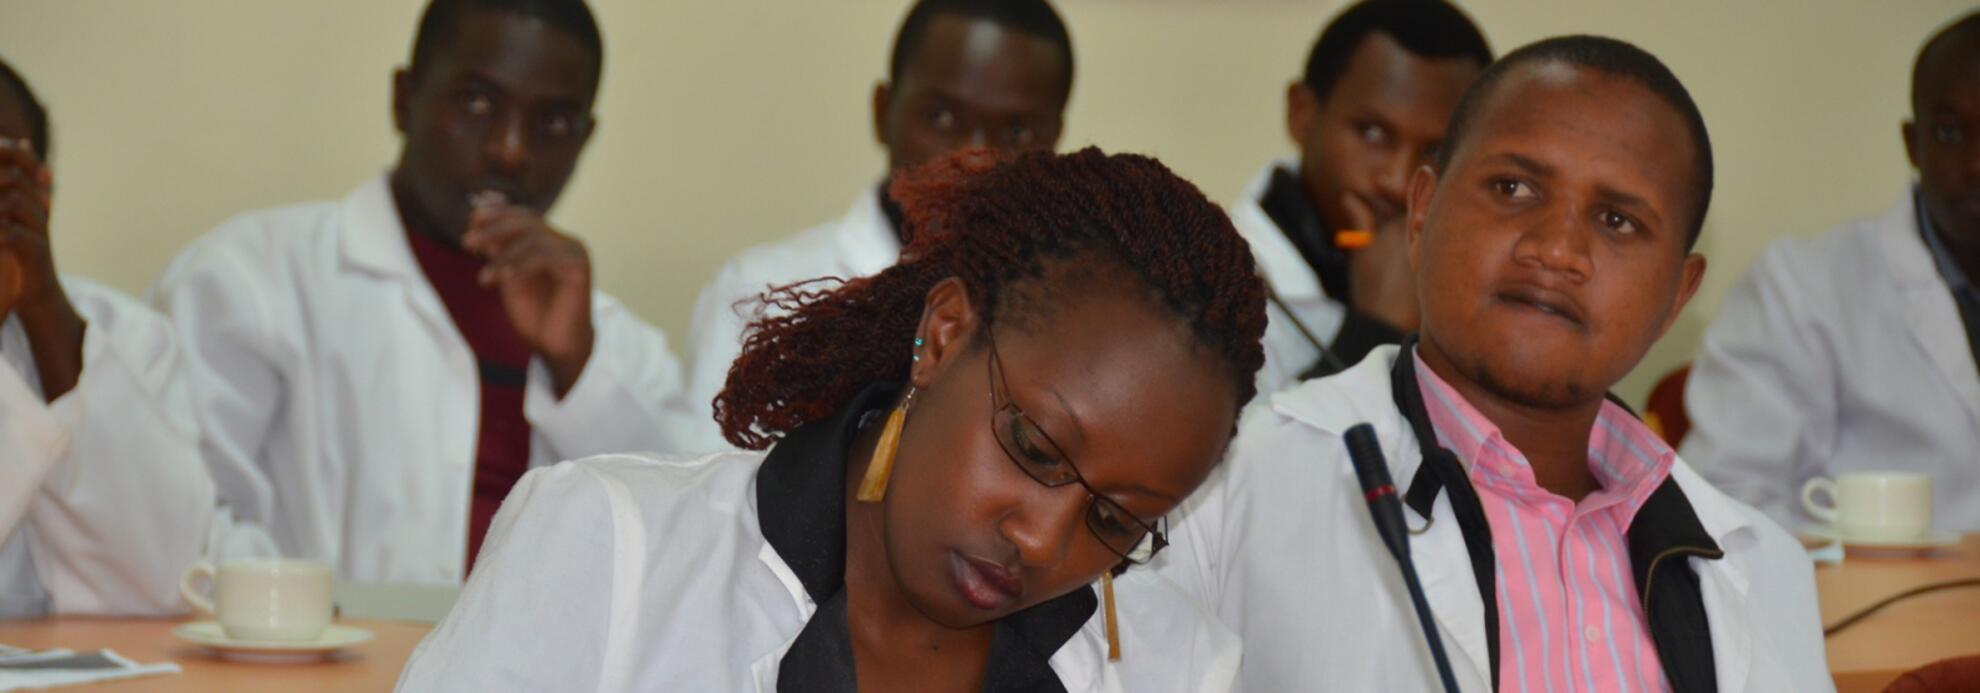 Undergraduate students from the University of Nairobi's College of Agriculture and Veterinary Sciences visit ILRI